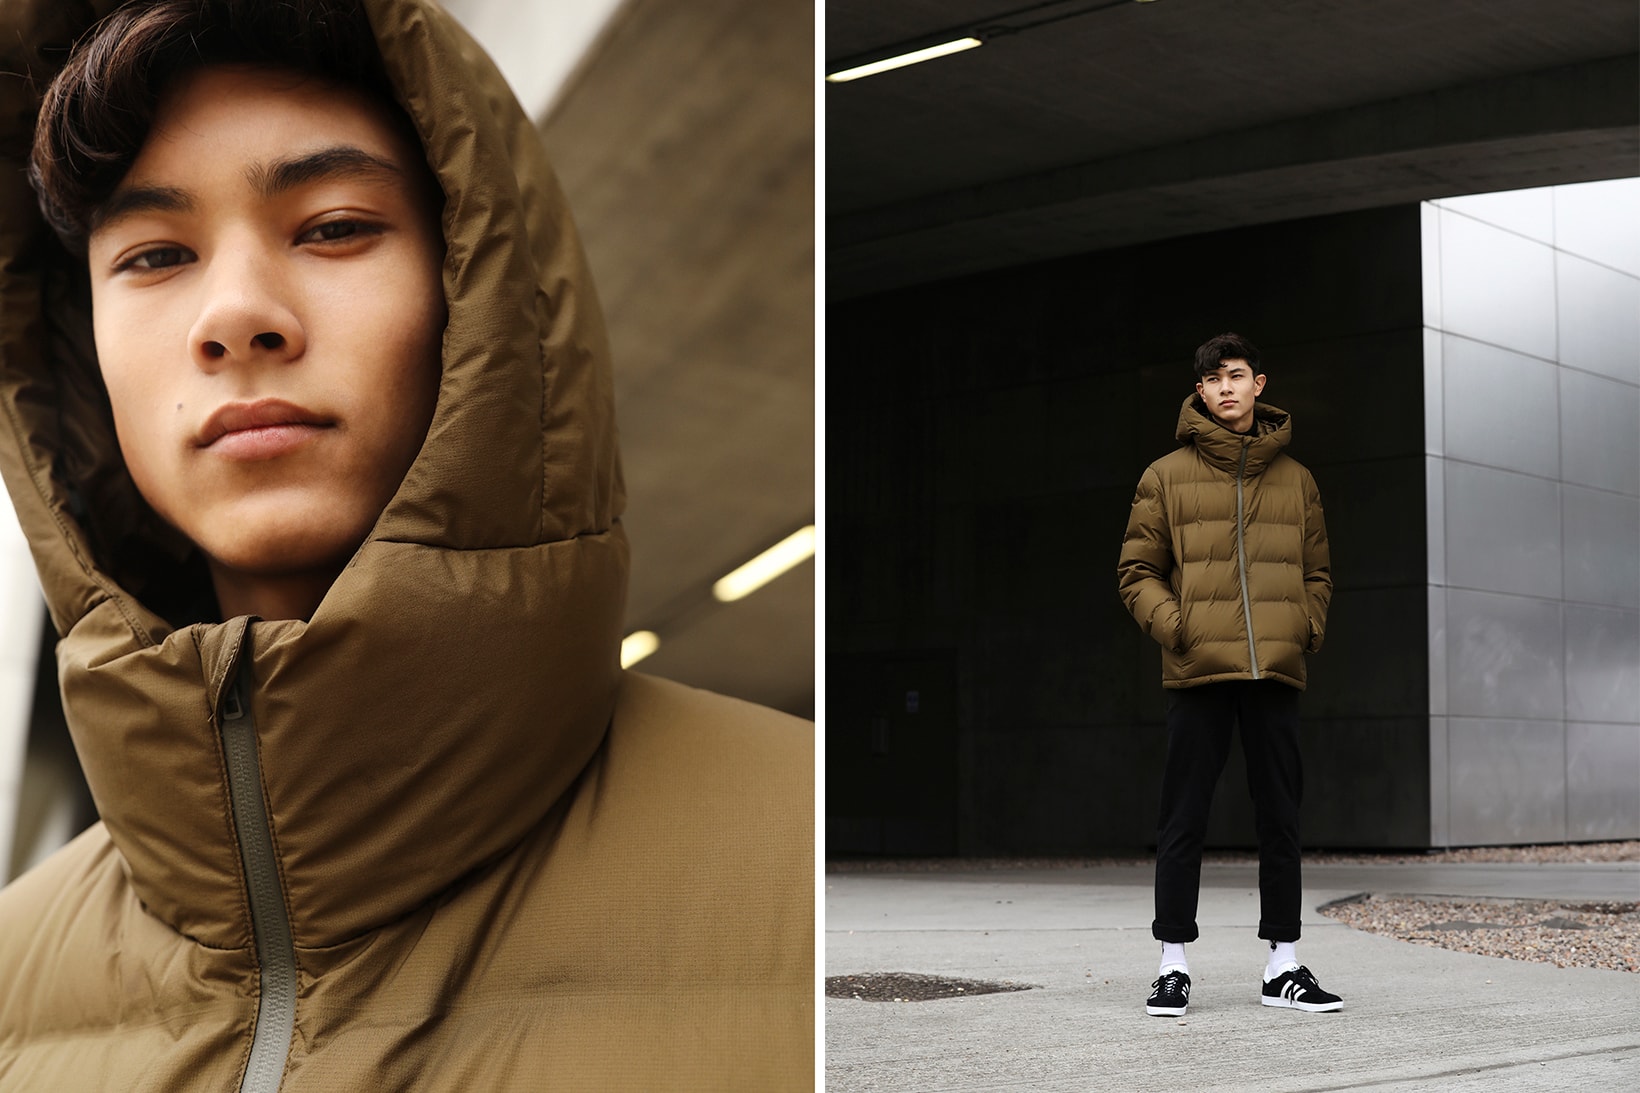 Uniqlo Seamless Down Innovation Lookbook collection bubble coat jacket parka outerwear blue grey gray brown